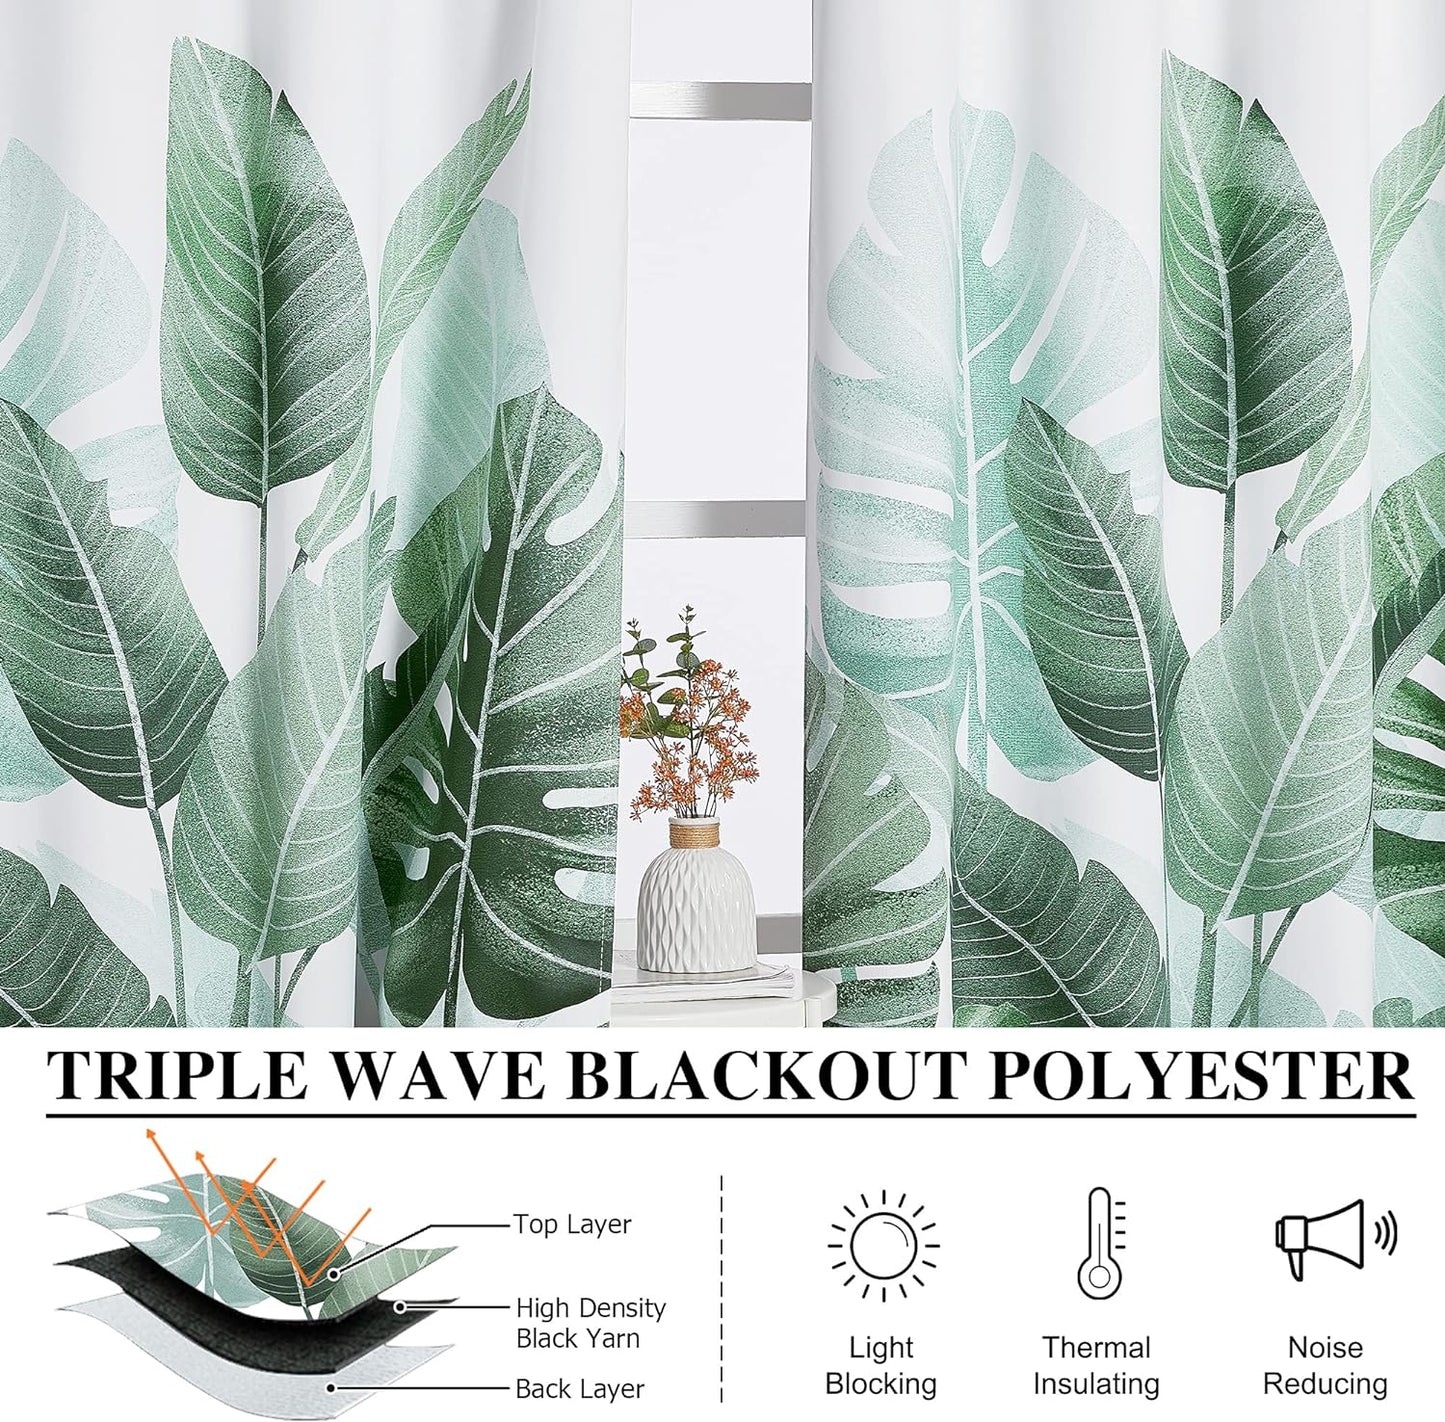 KGORGE Blackout Curtains for Bedroom, Farmhouse Tripical Leaves Pattern Curtains & Drapes Insulating Privacy Window Treatment for Dining Living Room Office Studio, W52 X L63 Inch, 2 Panels  KGORGE   